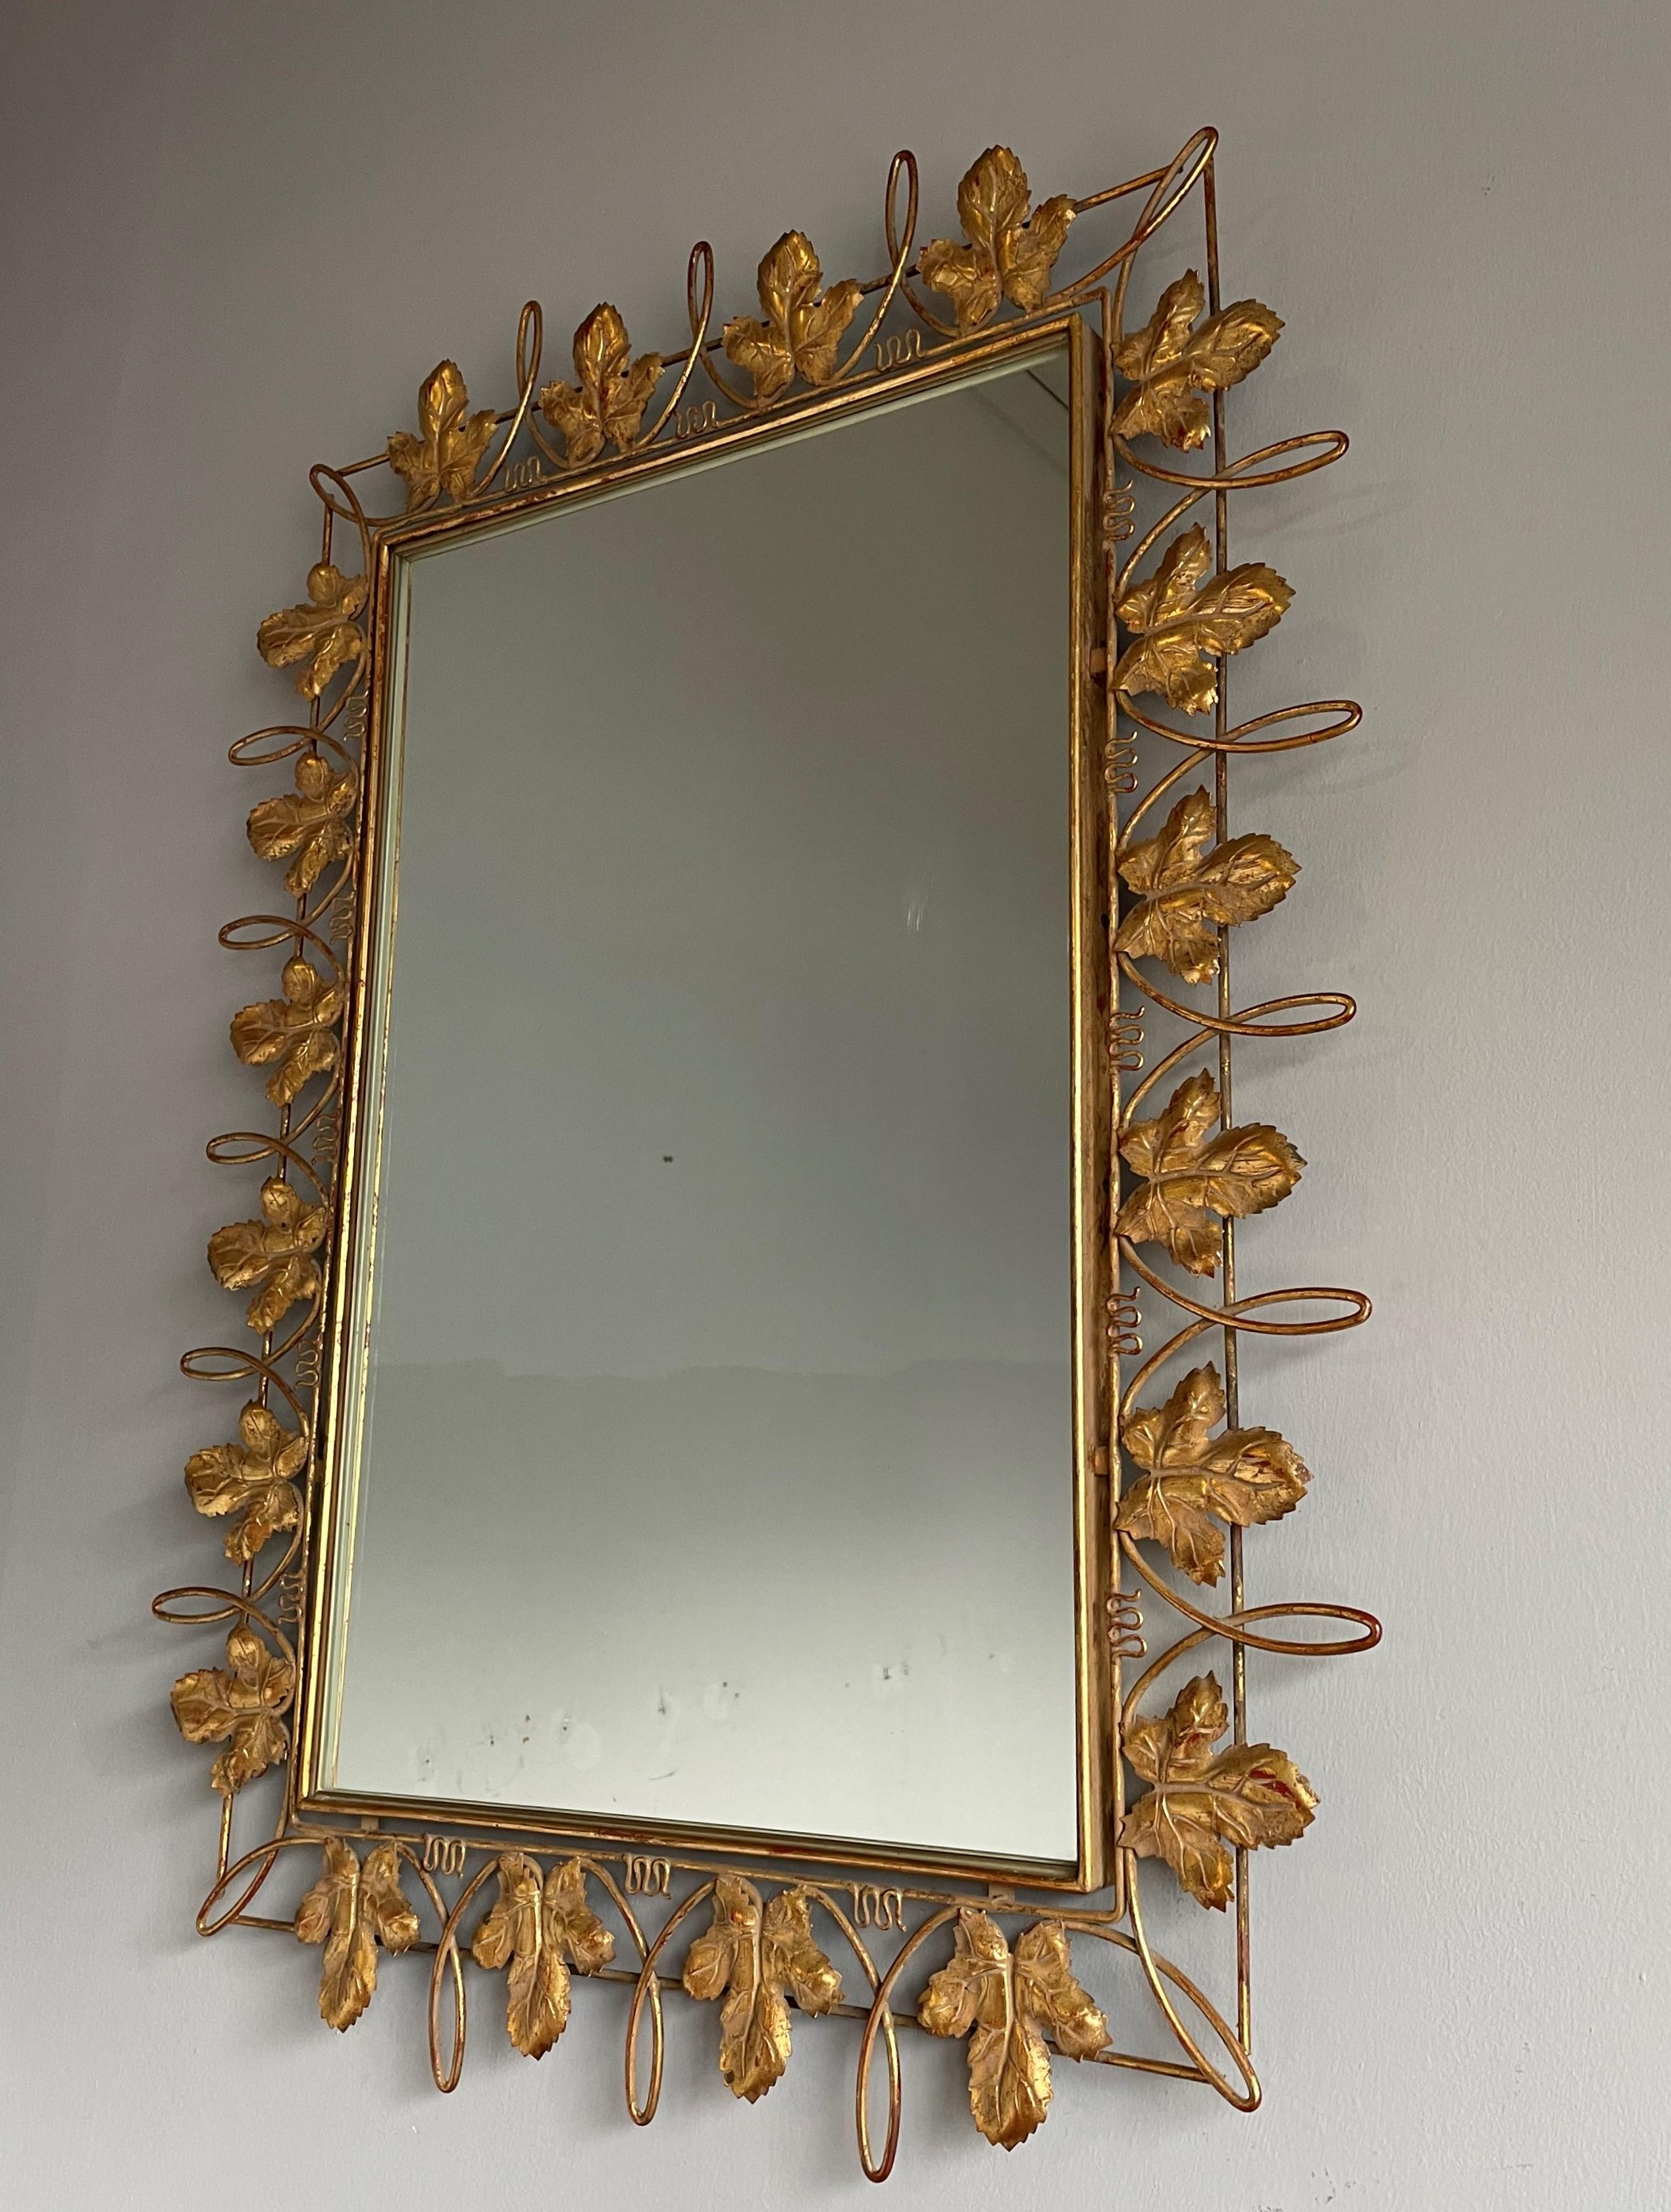 Unique Arts & Crafts Style Wall Mirror w. Gold Painted Grape Leafs / Wine Theme For Sale 9